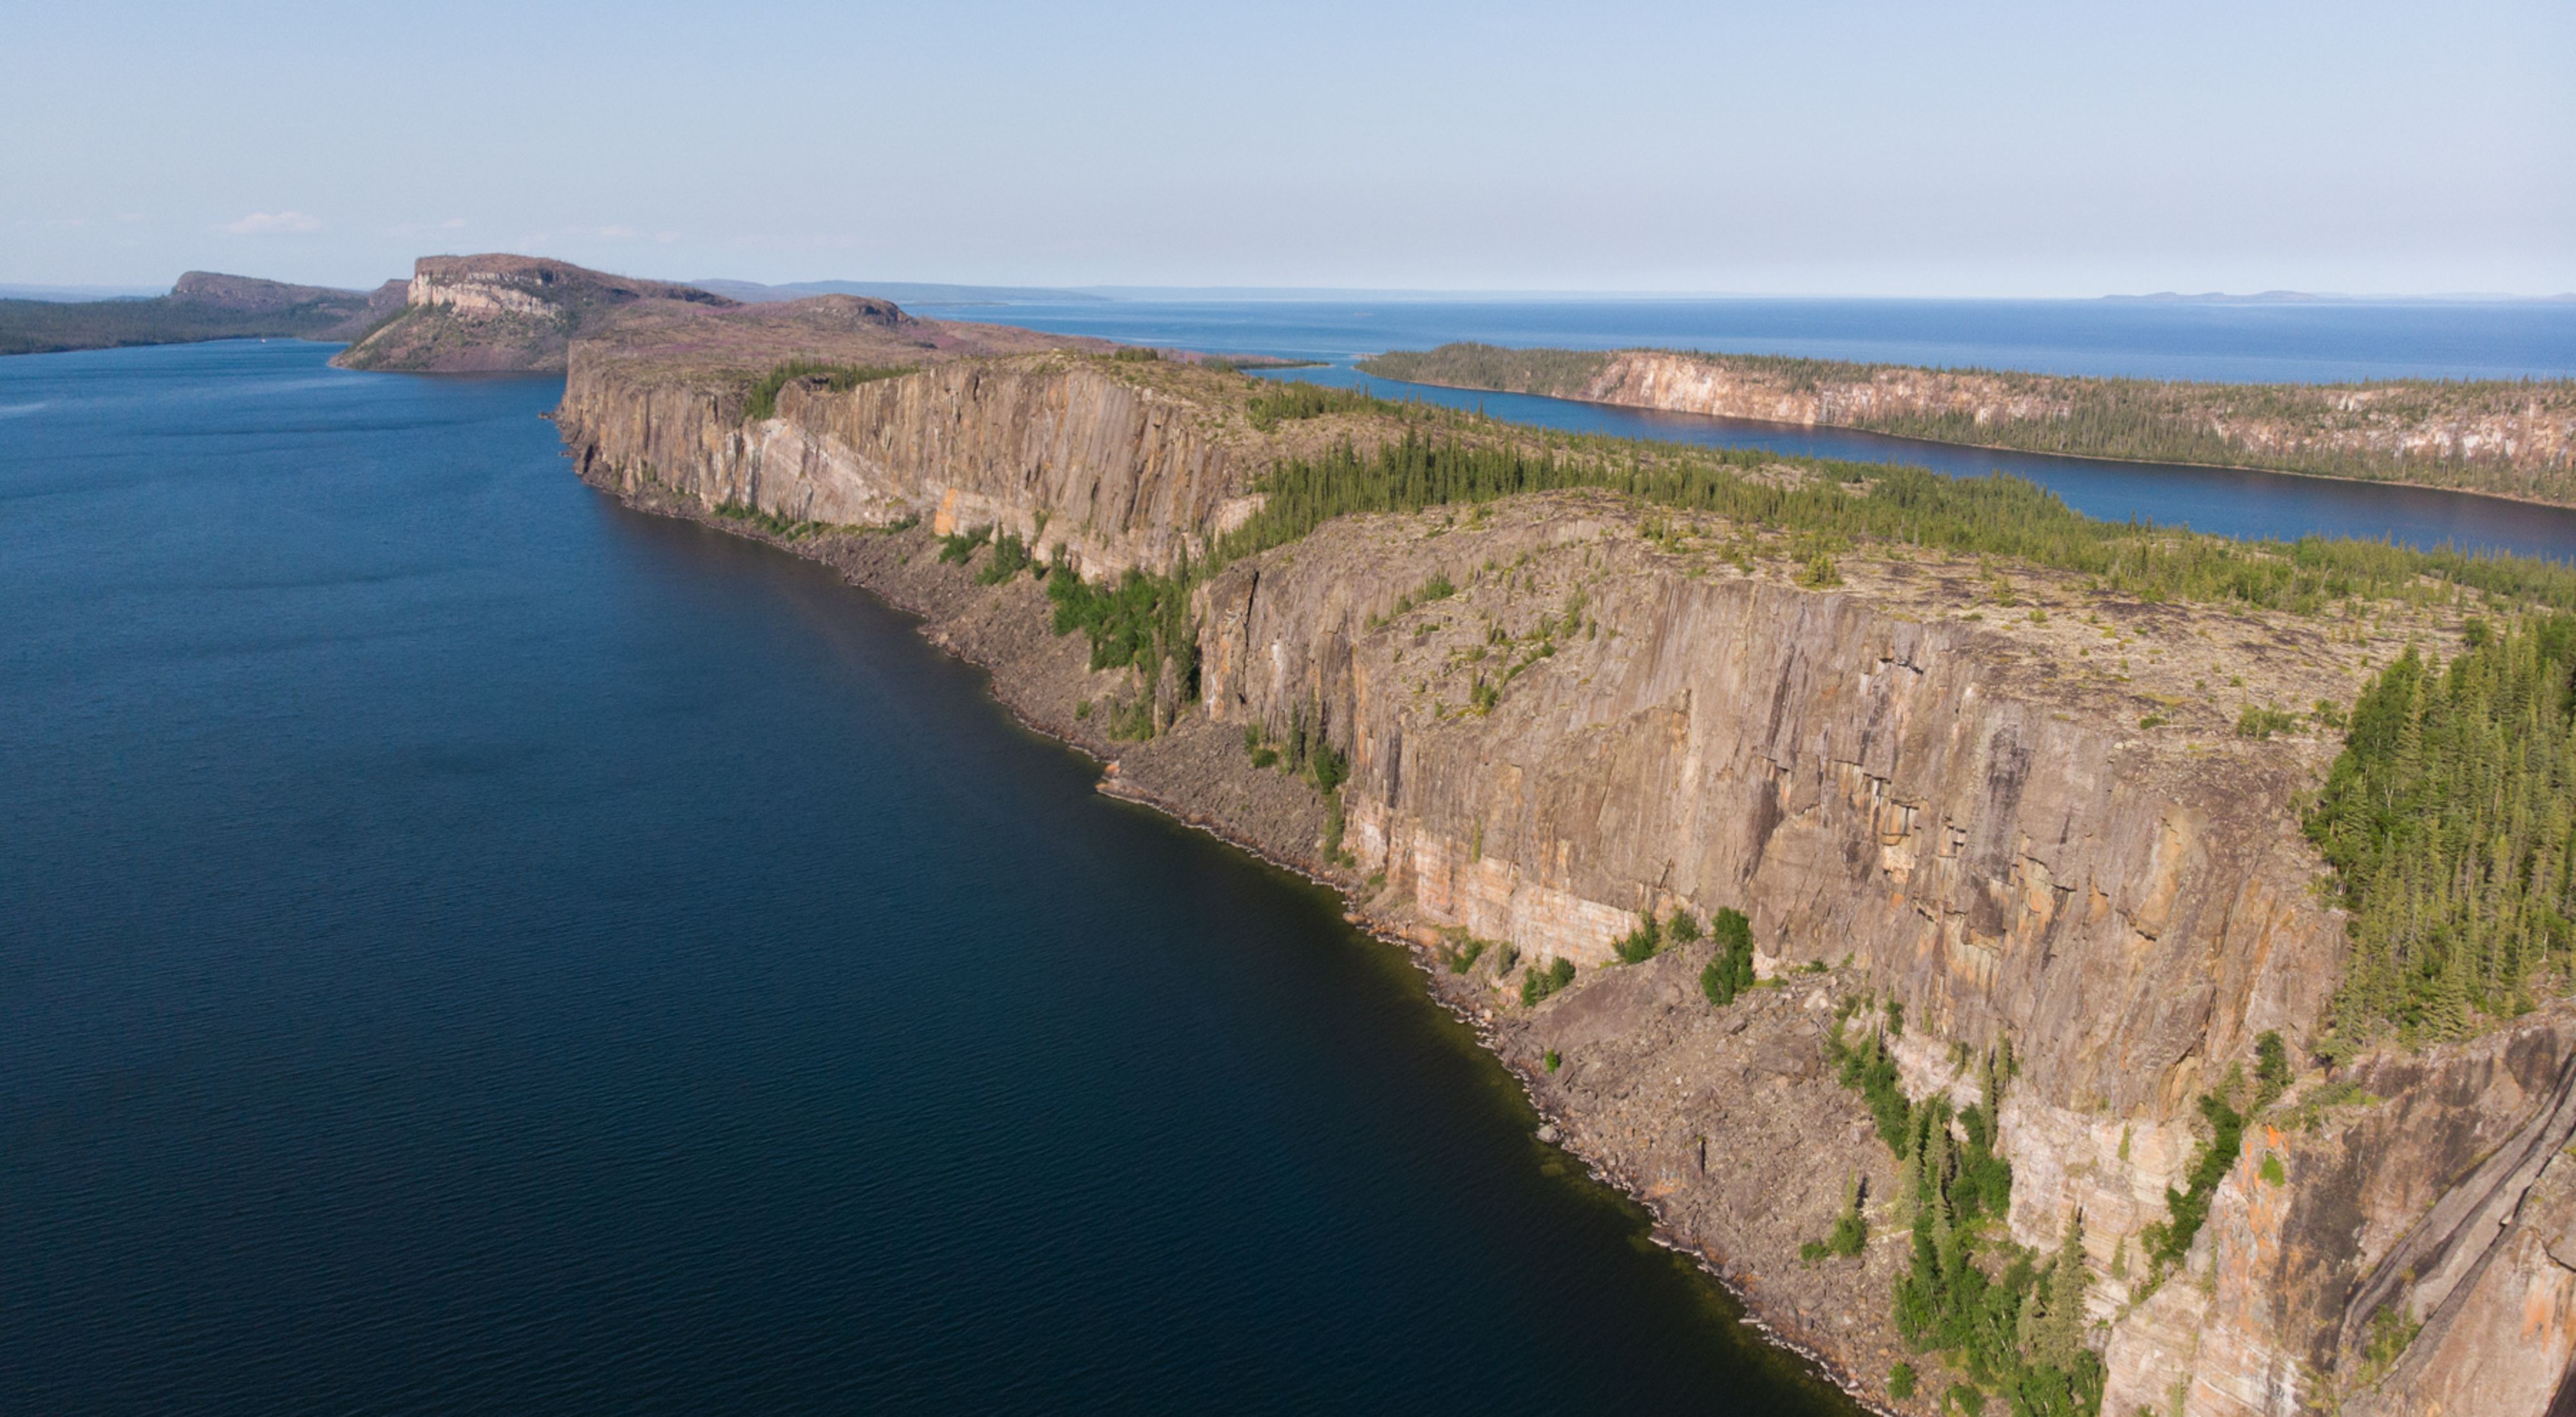 An aerial view of along chain of tall rocky cliffs next to a large body of water.